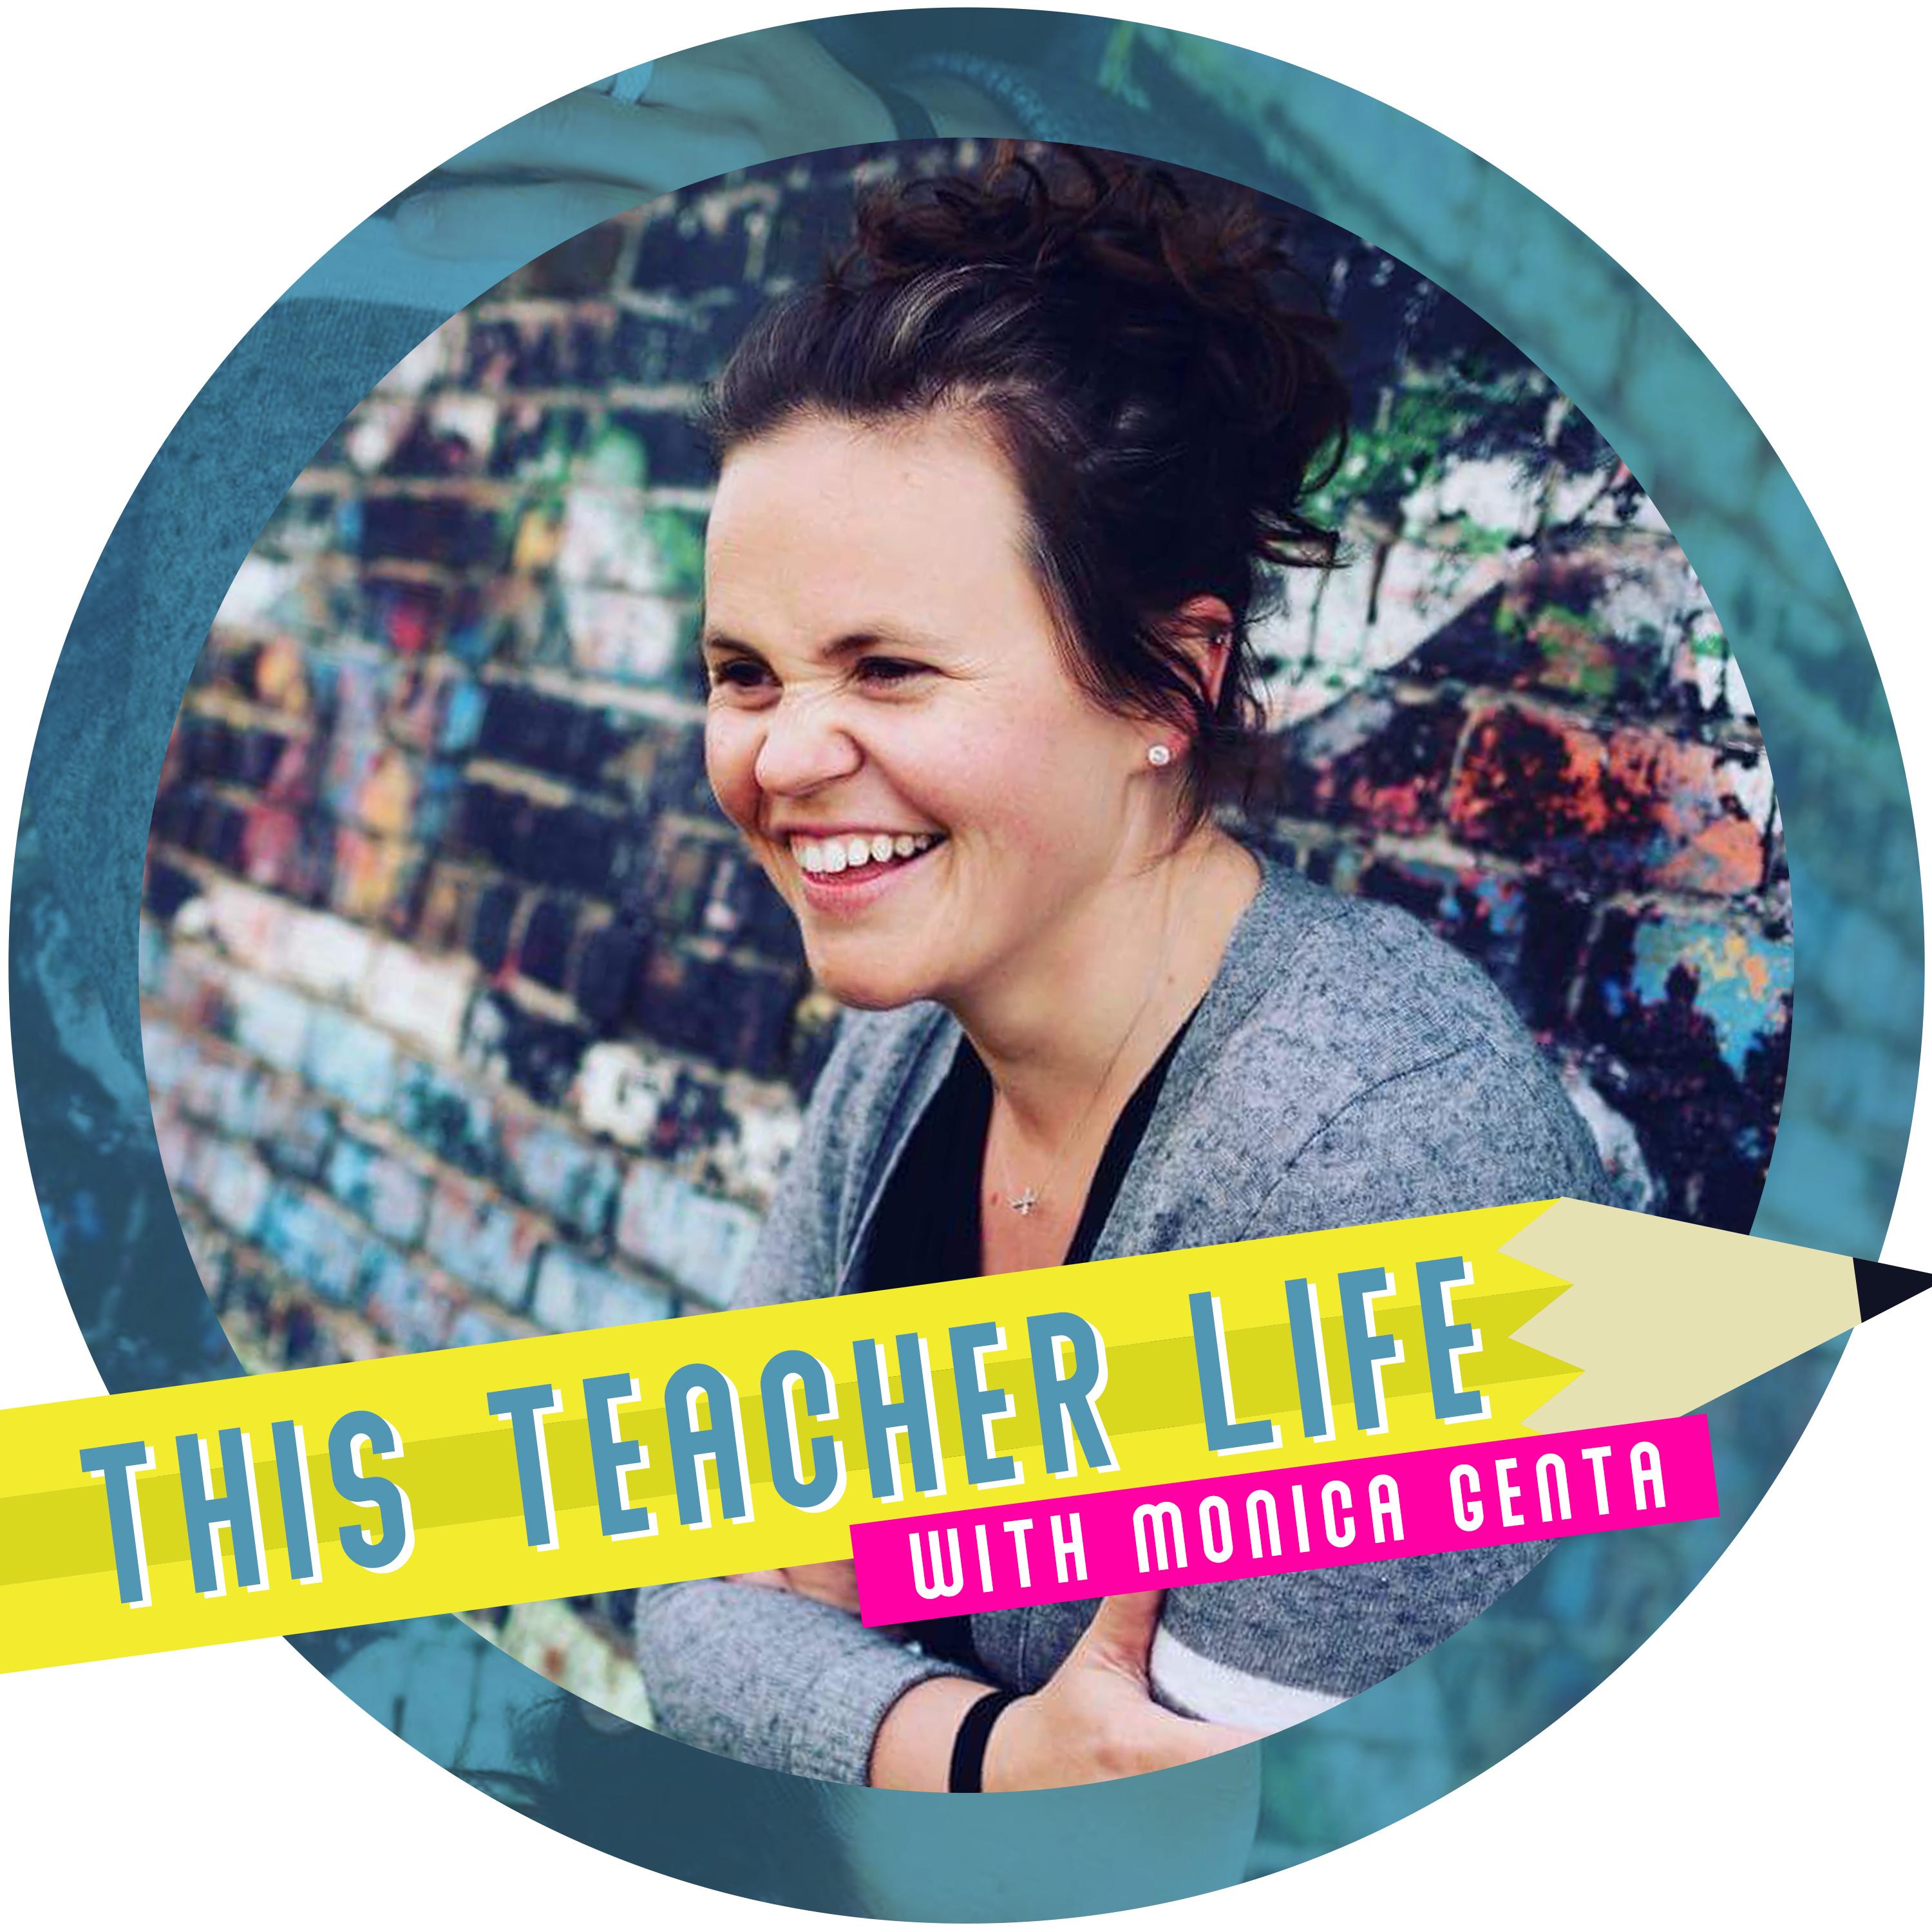 3 Reasons Why Teachers Are Leaving Education + Solutions on How to Solve the Problem If You Are Stressed & Struggling- Bonus Replay Episode